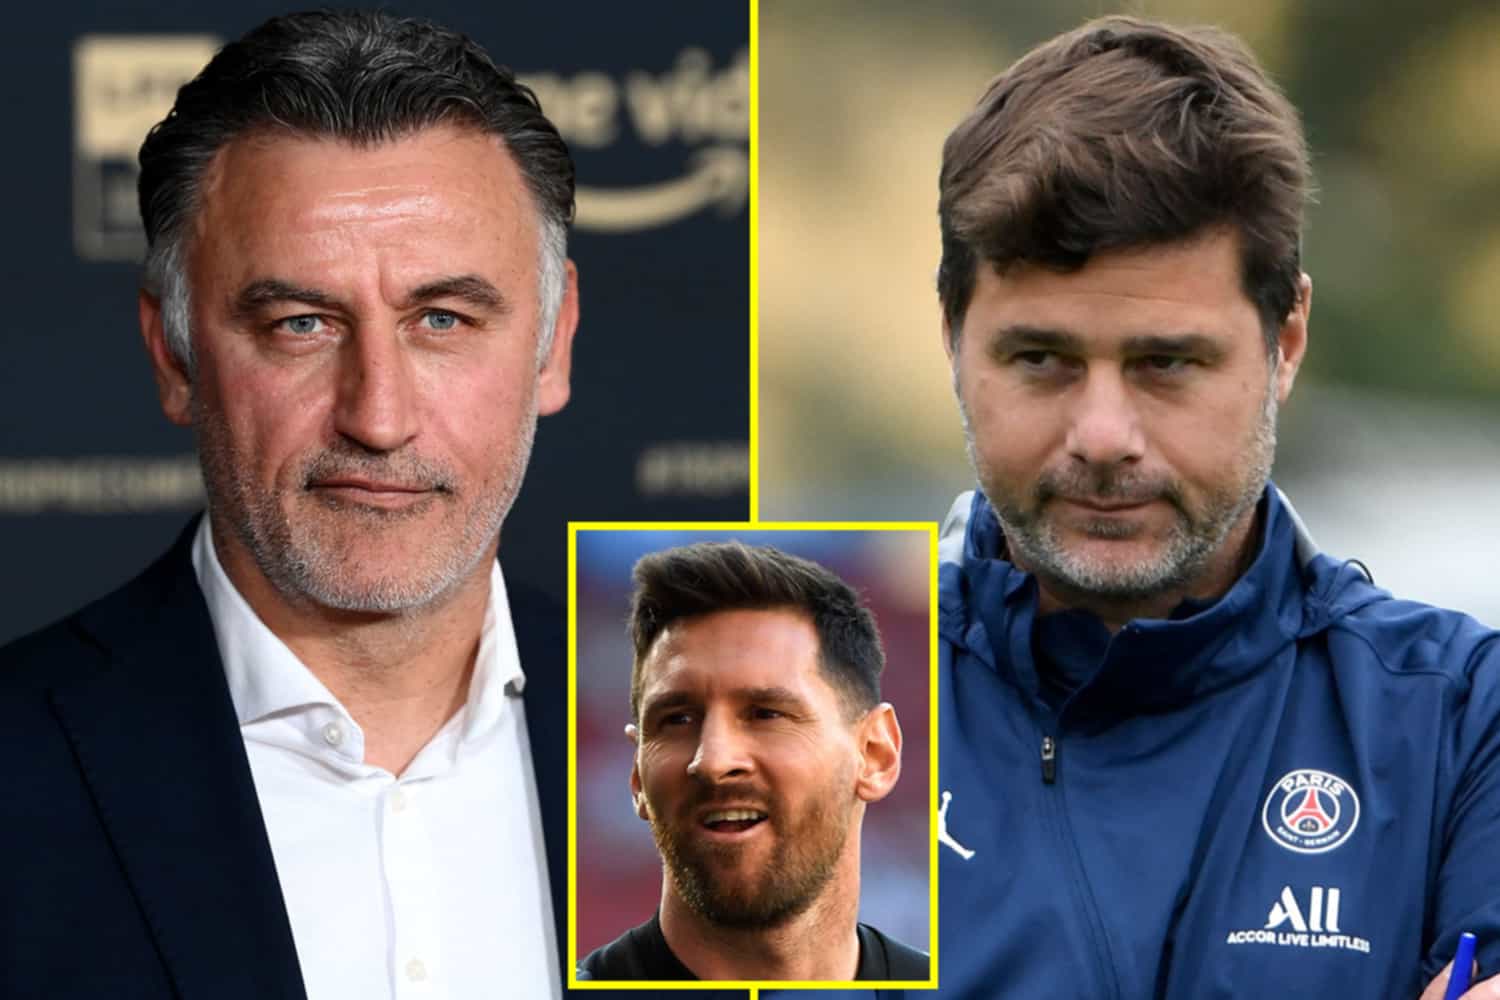 Paris Saint-Germain set to appoint Christophe Galtier as Mauricio Pochettino’s replacement and club could sign ex-Premier League stars to play behind Lionel Messi, Kylian Mbappe, and Neymar